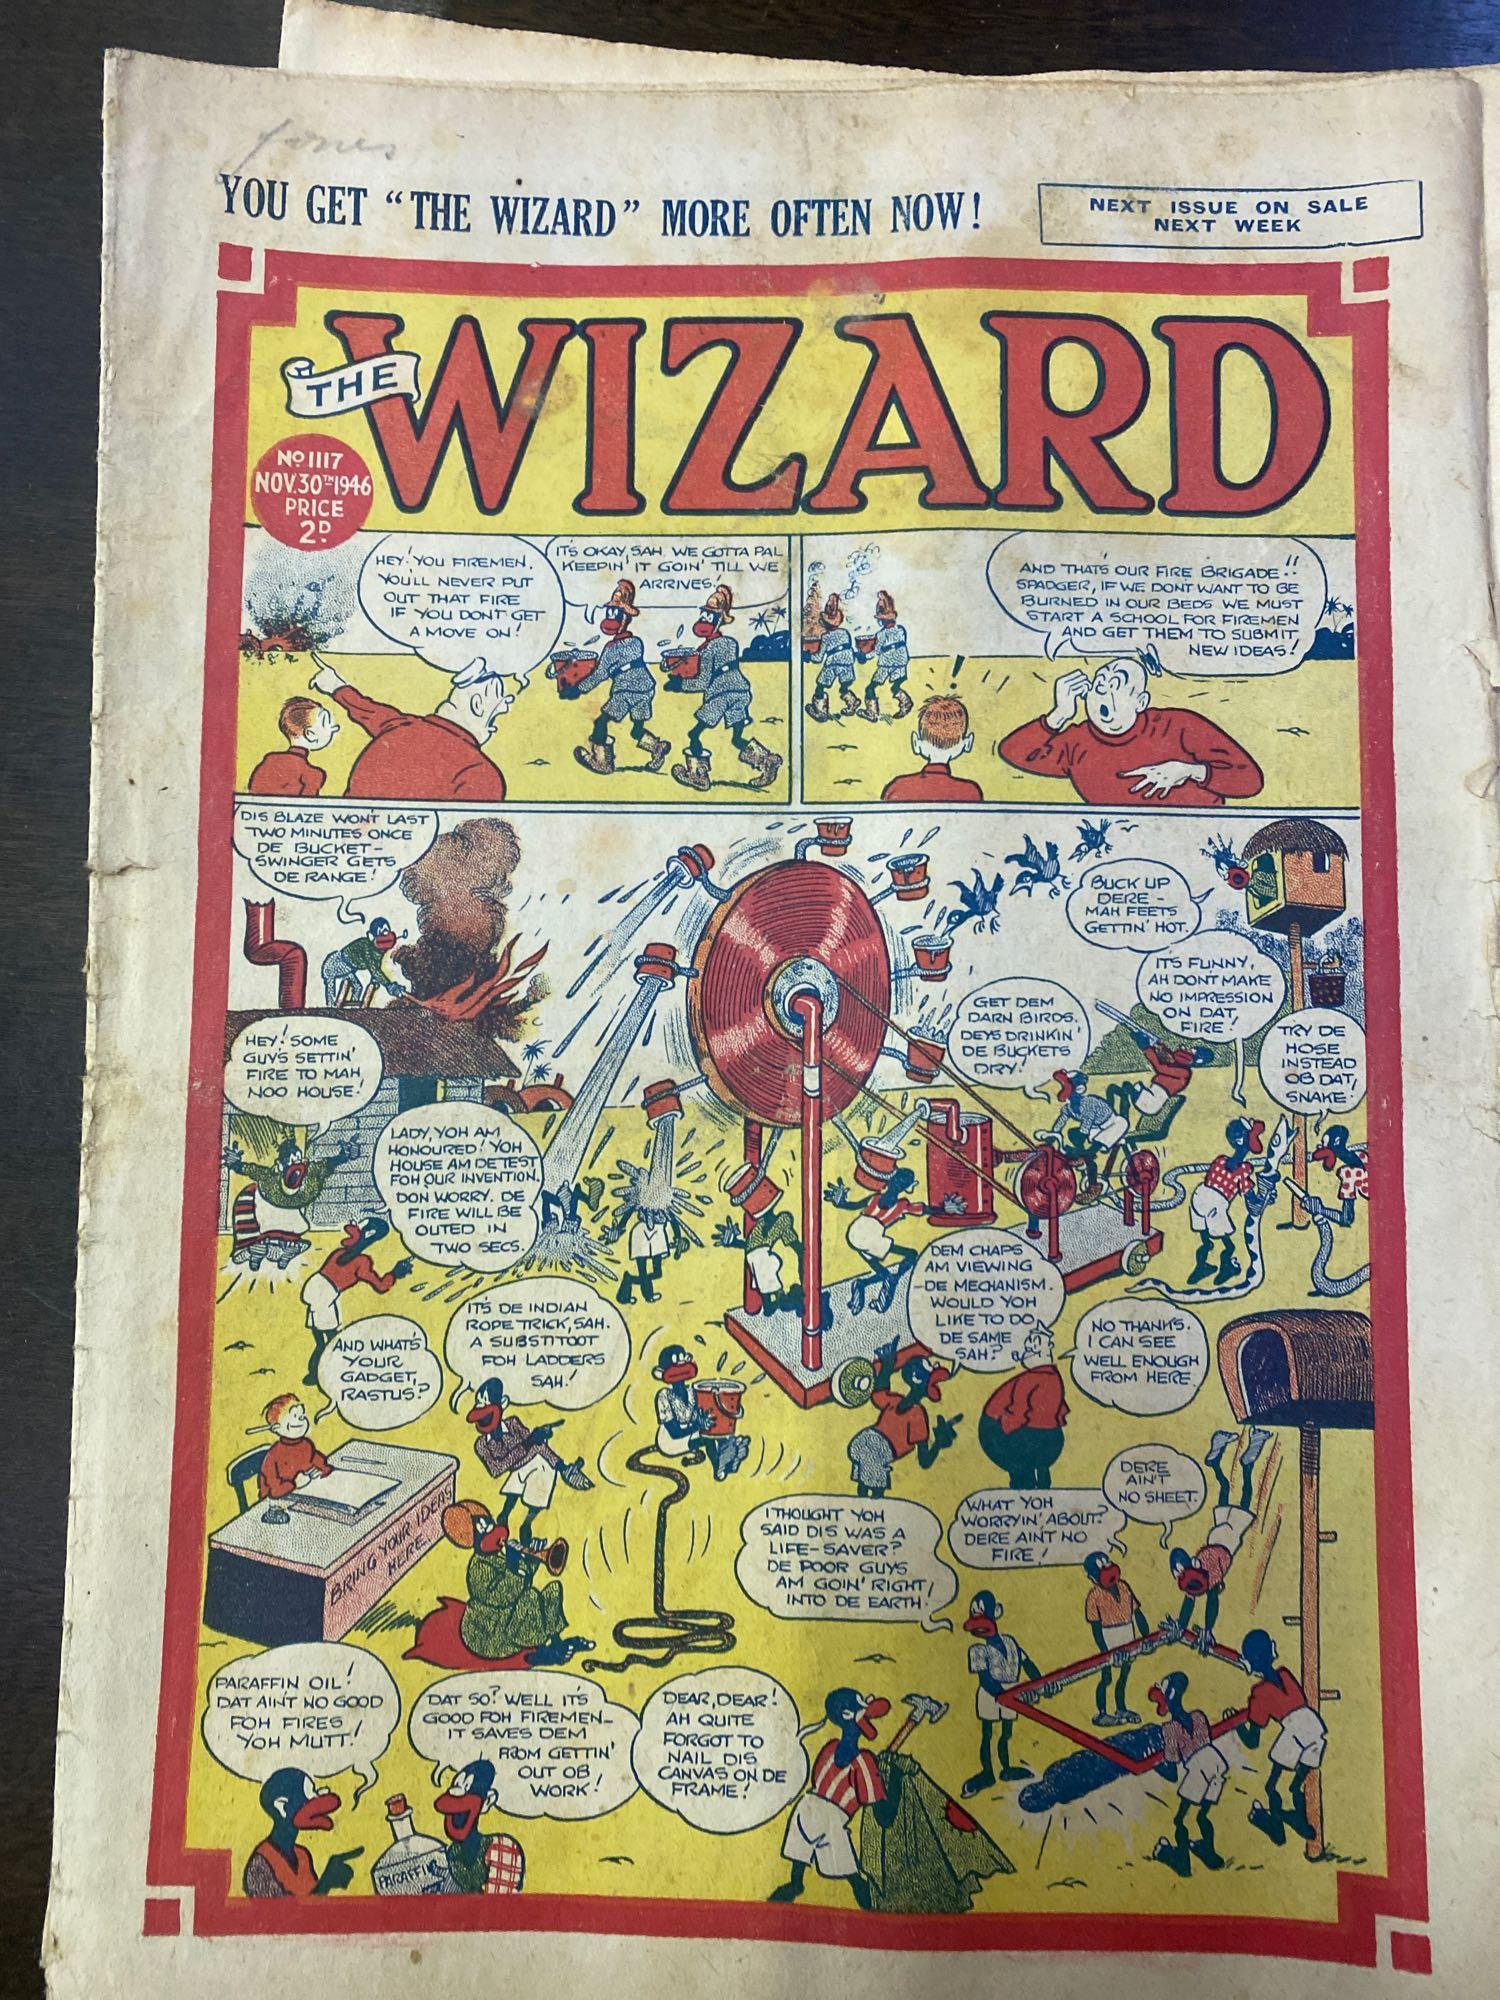 A quantity of vintage comics and childrens newspapers - Image 34 of 124